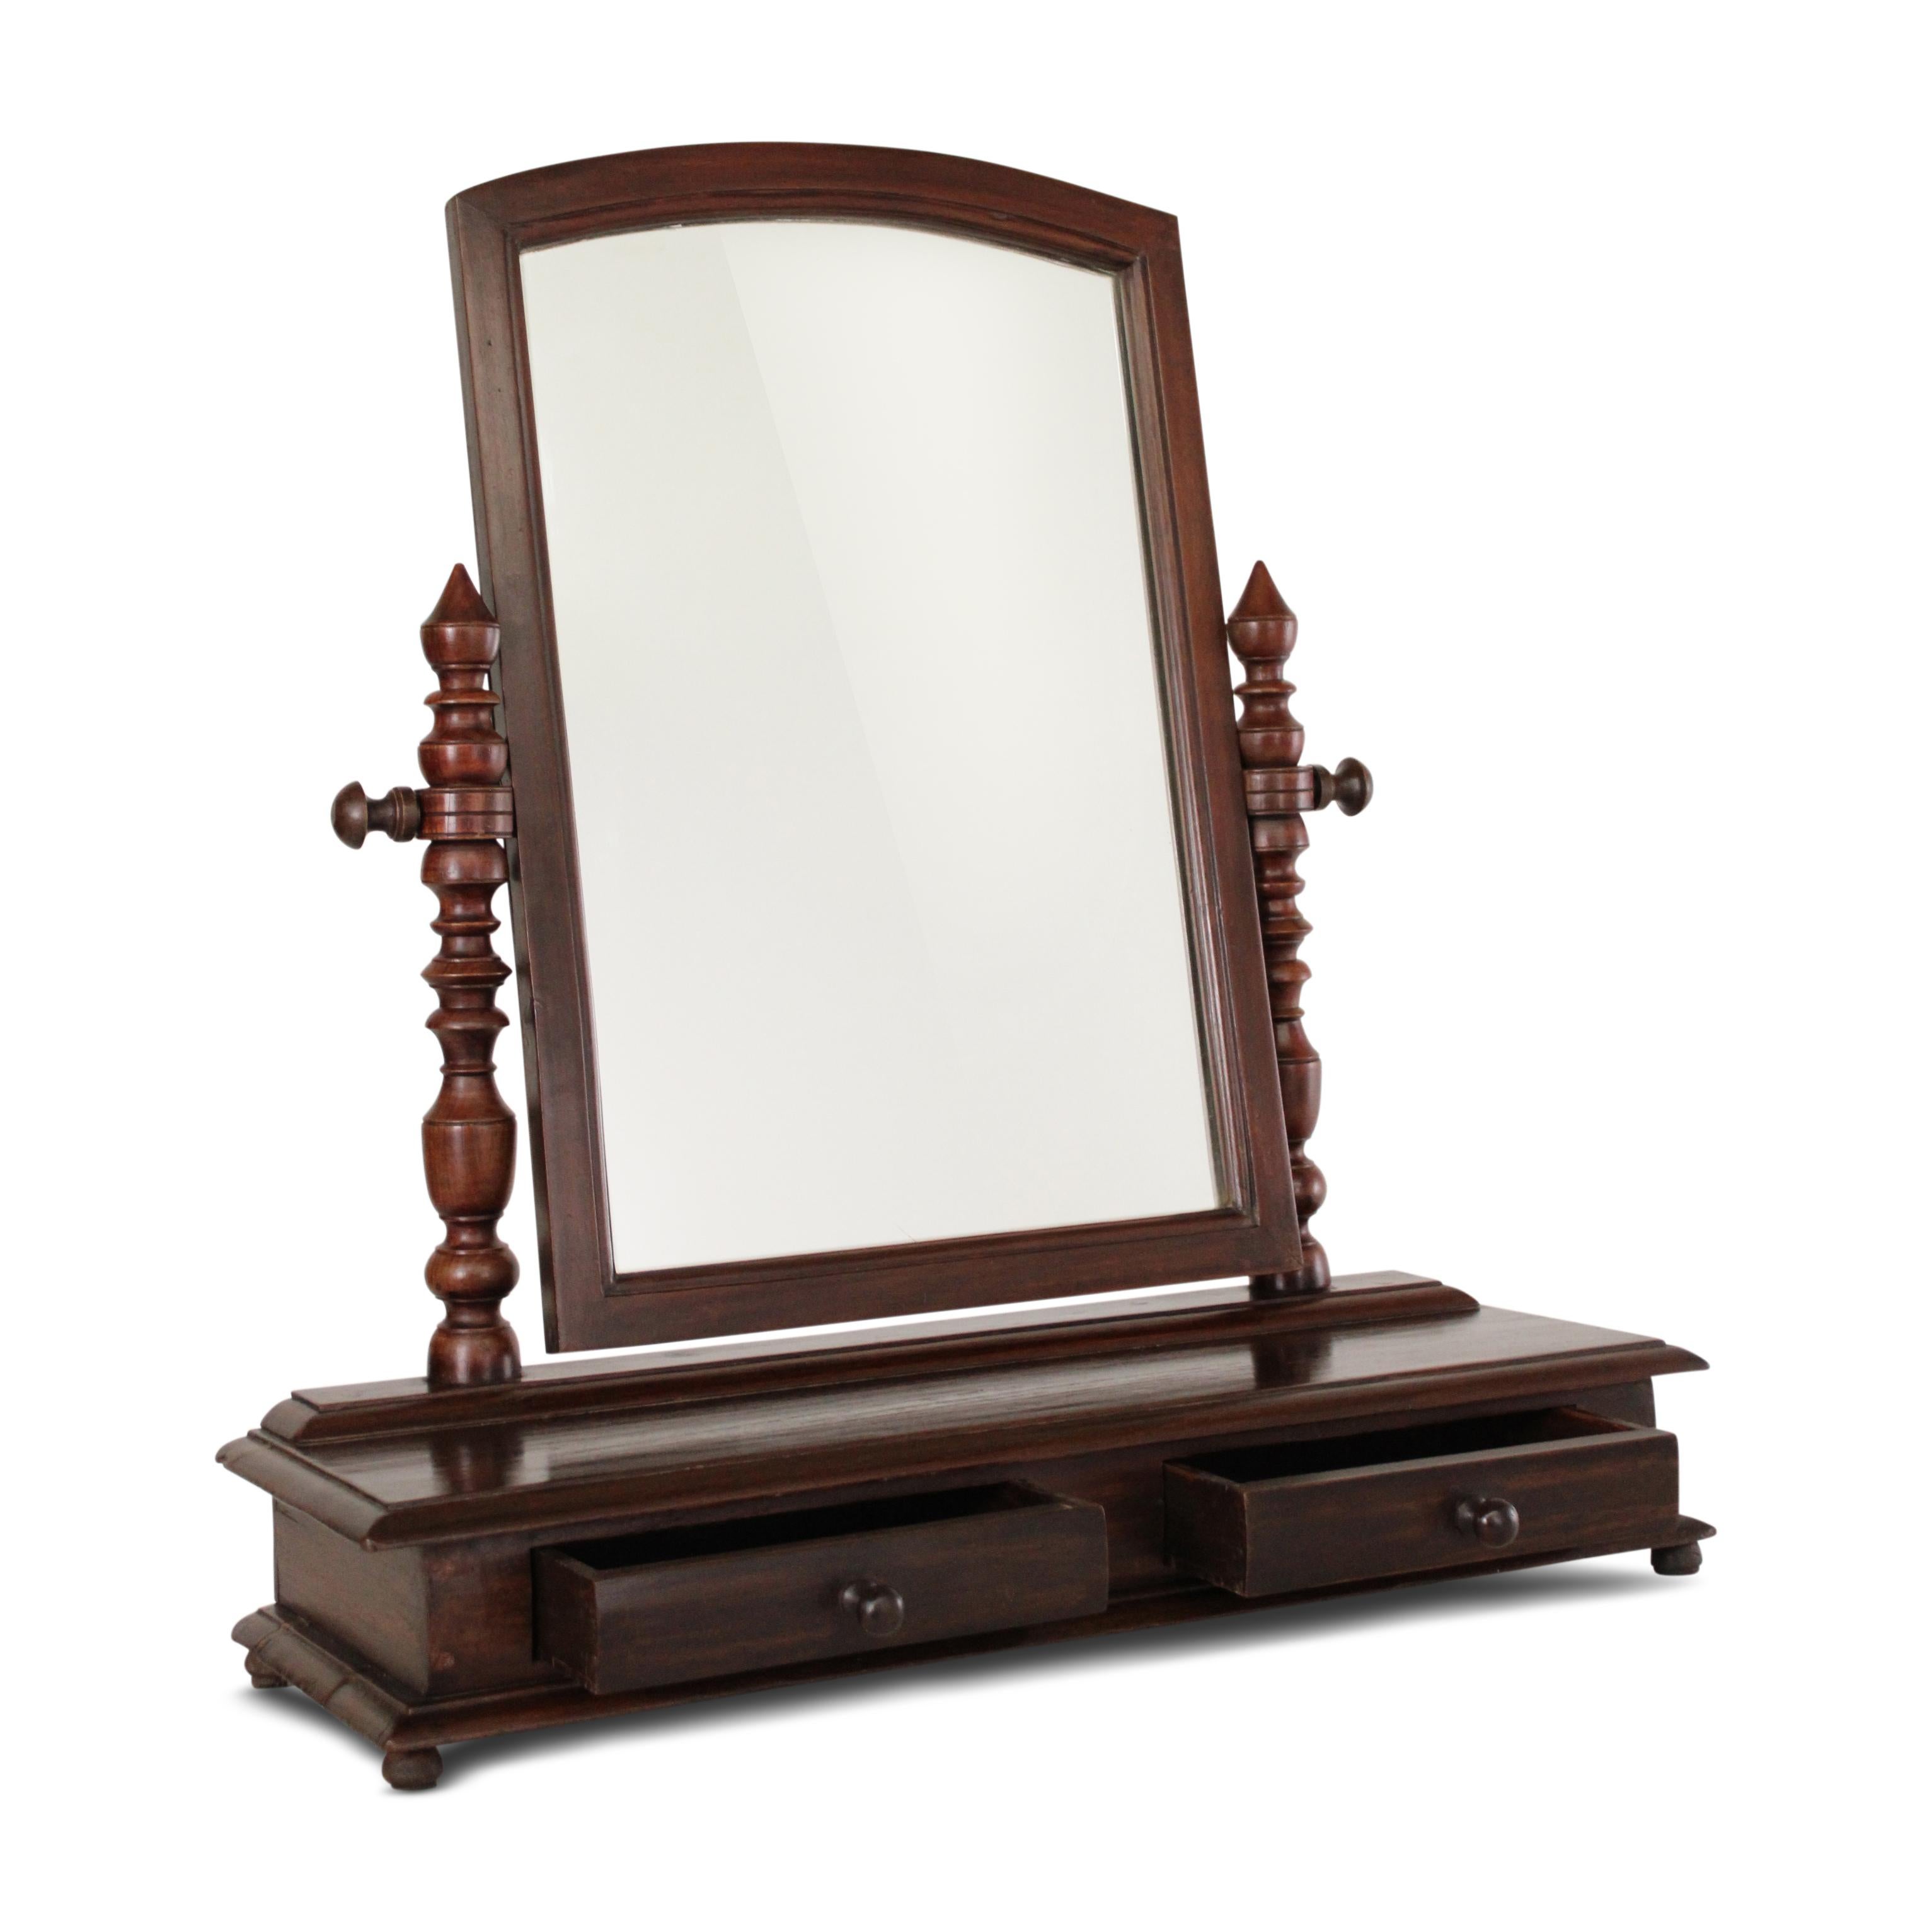 An elegant teak tabletop vanity mirror. The combination of the turned supports, original mirror frame, and drawer create a harmonious blend of form and function.